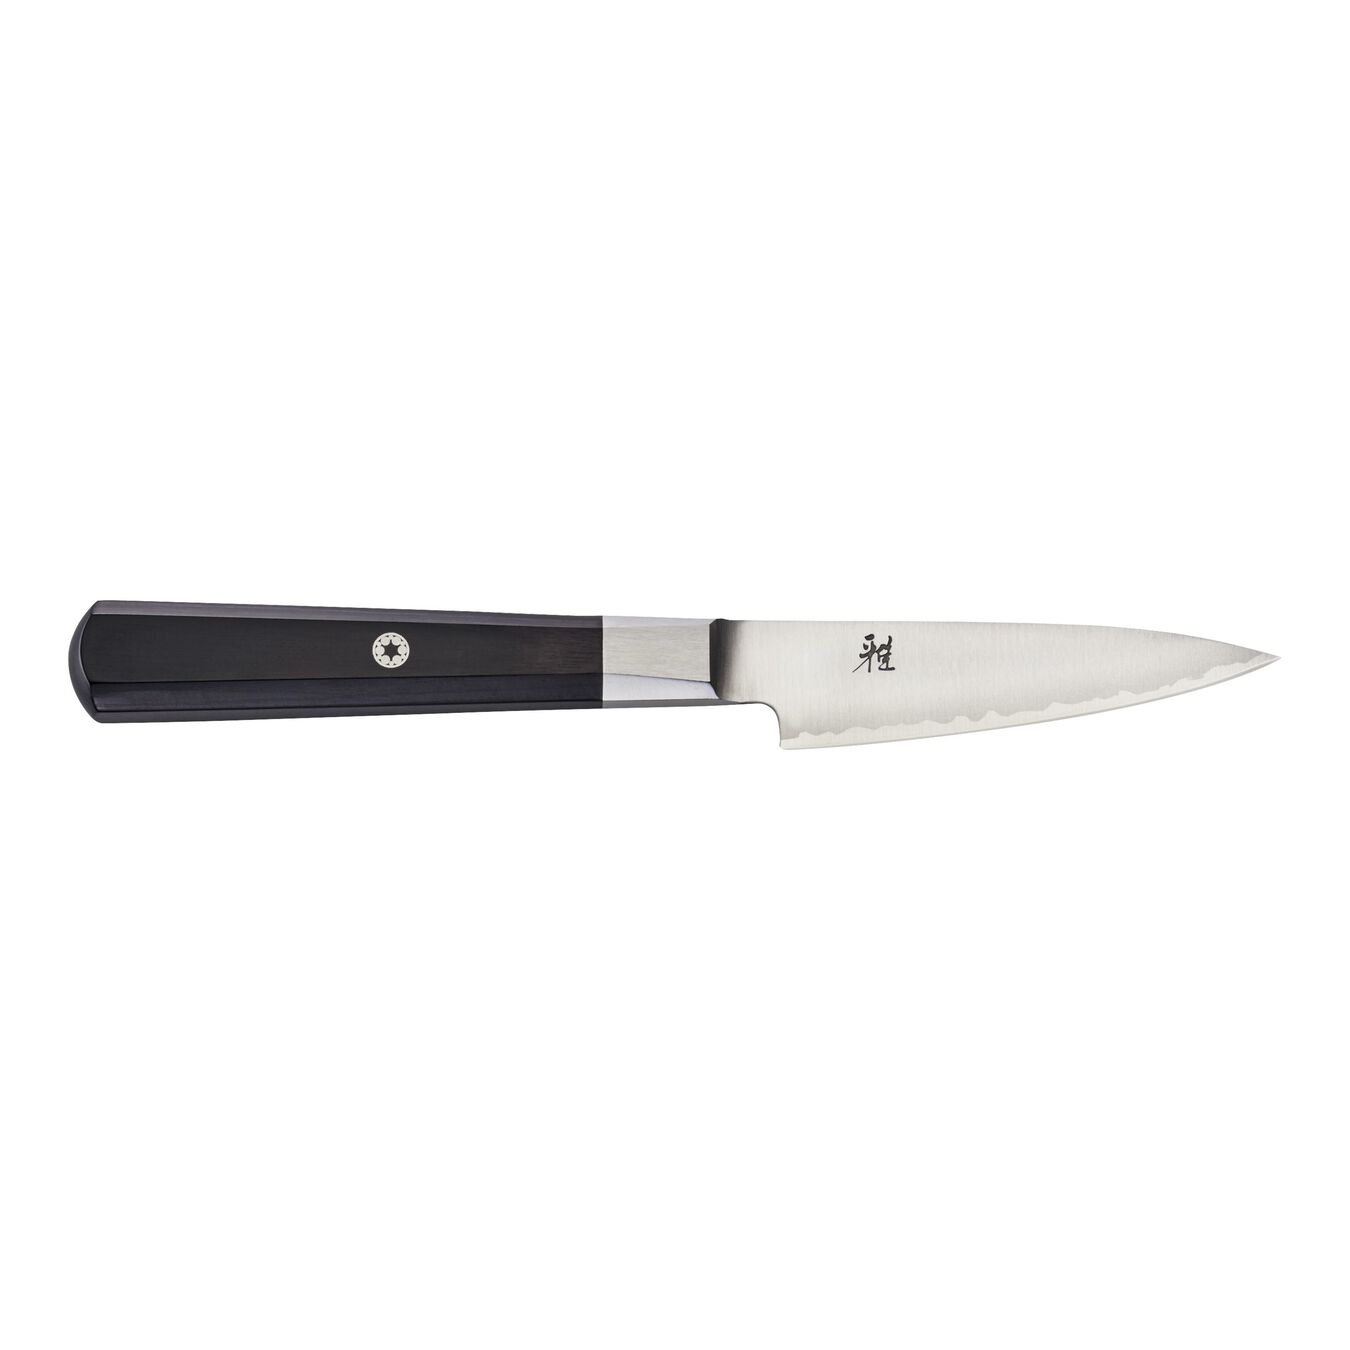 3.5-inch,  Paring Knife,,large 1